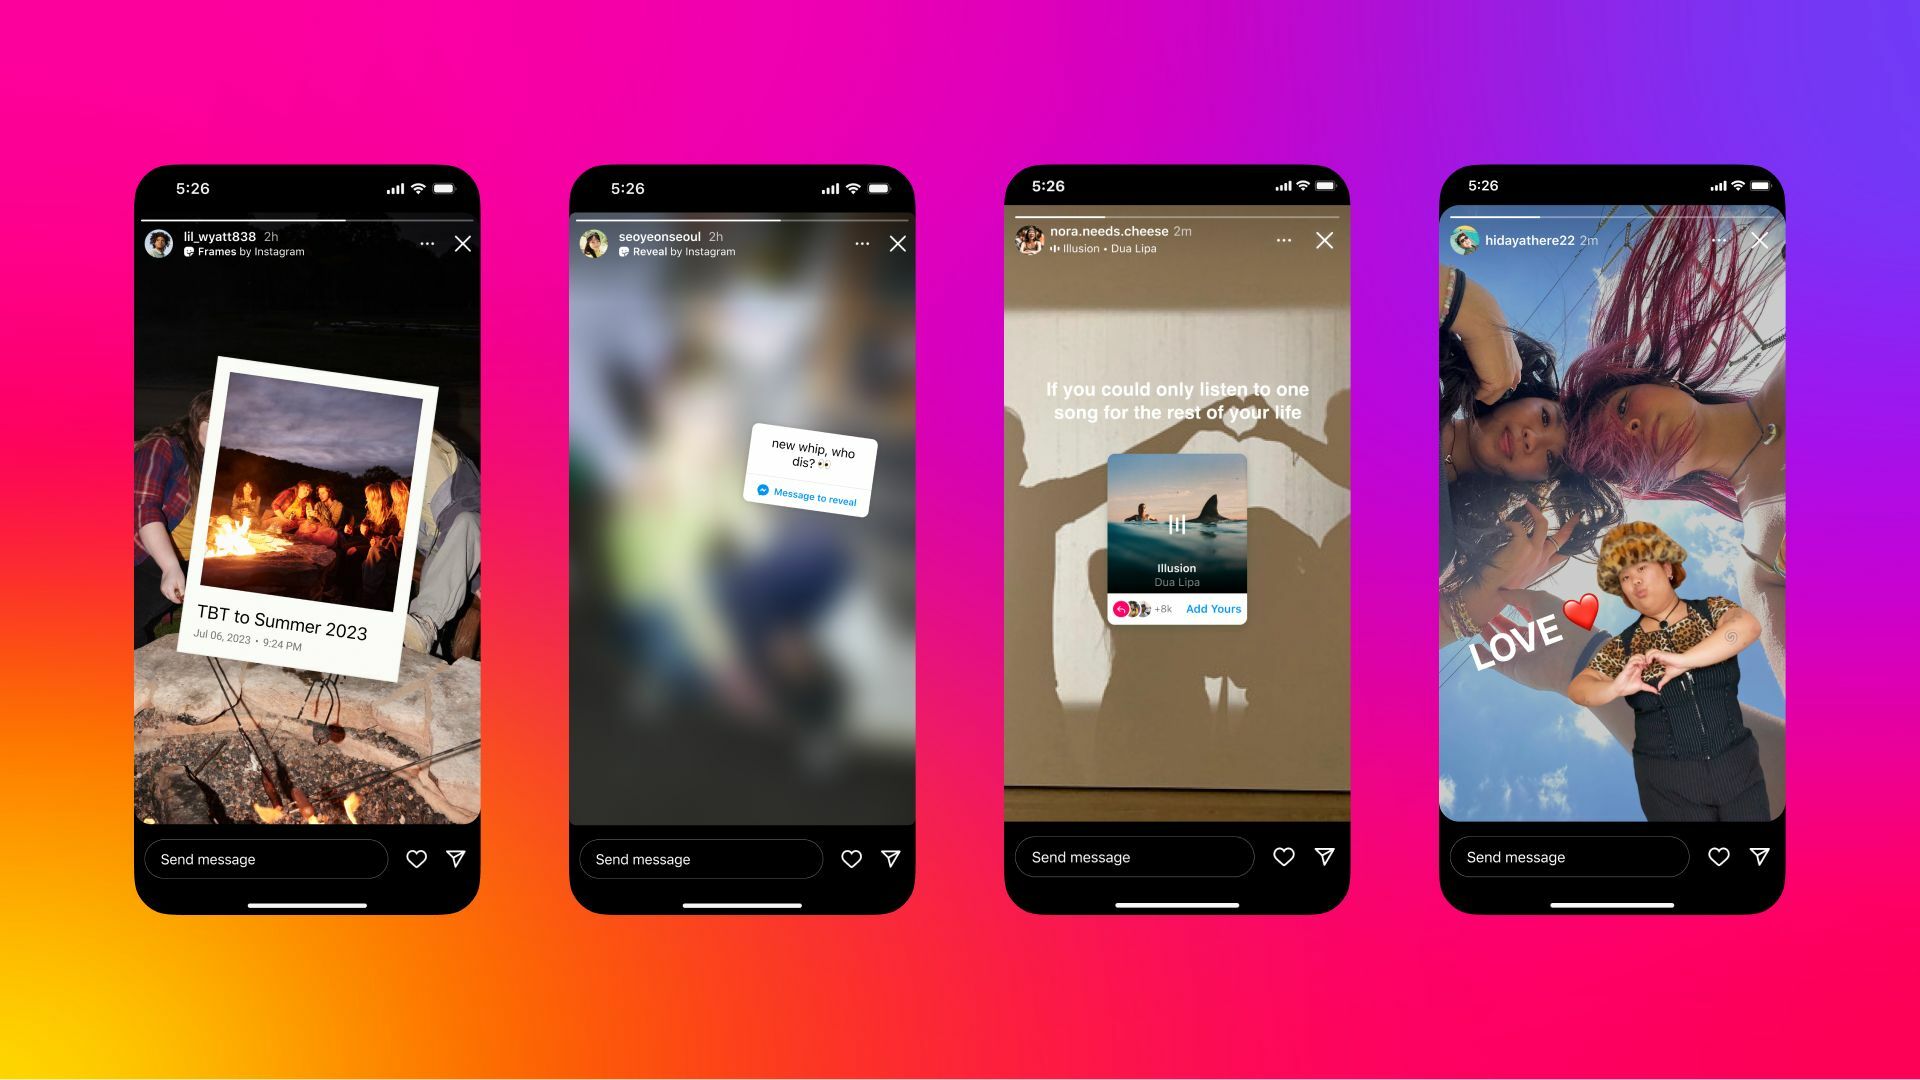 Four screenshots of Instagram with new sticker features displayed on each.